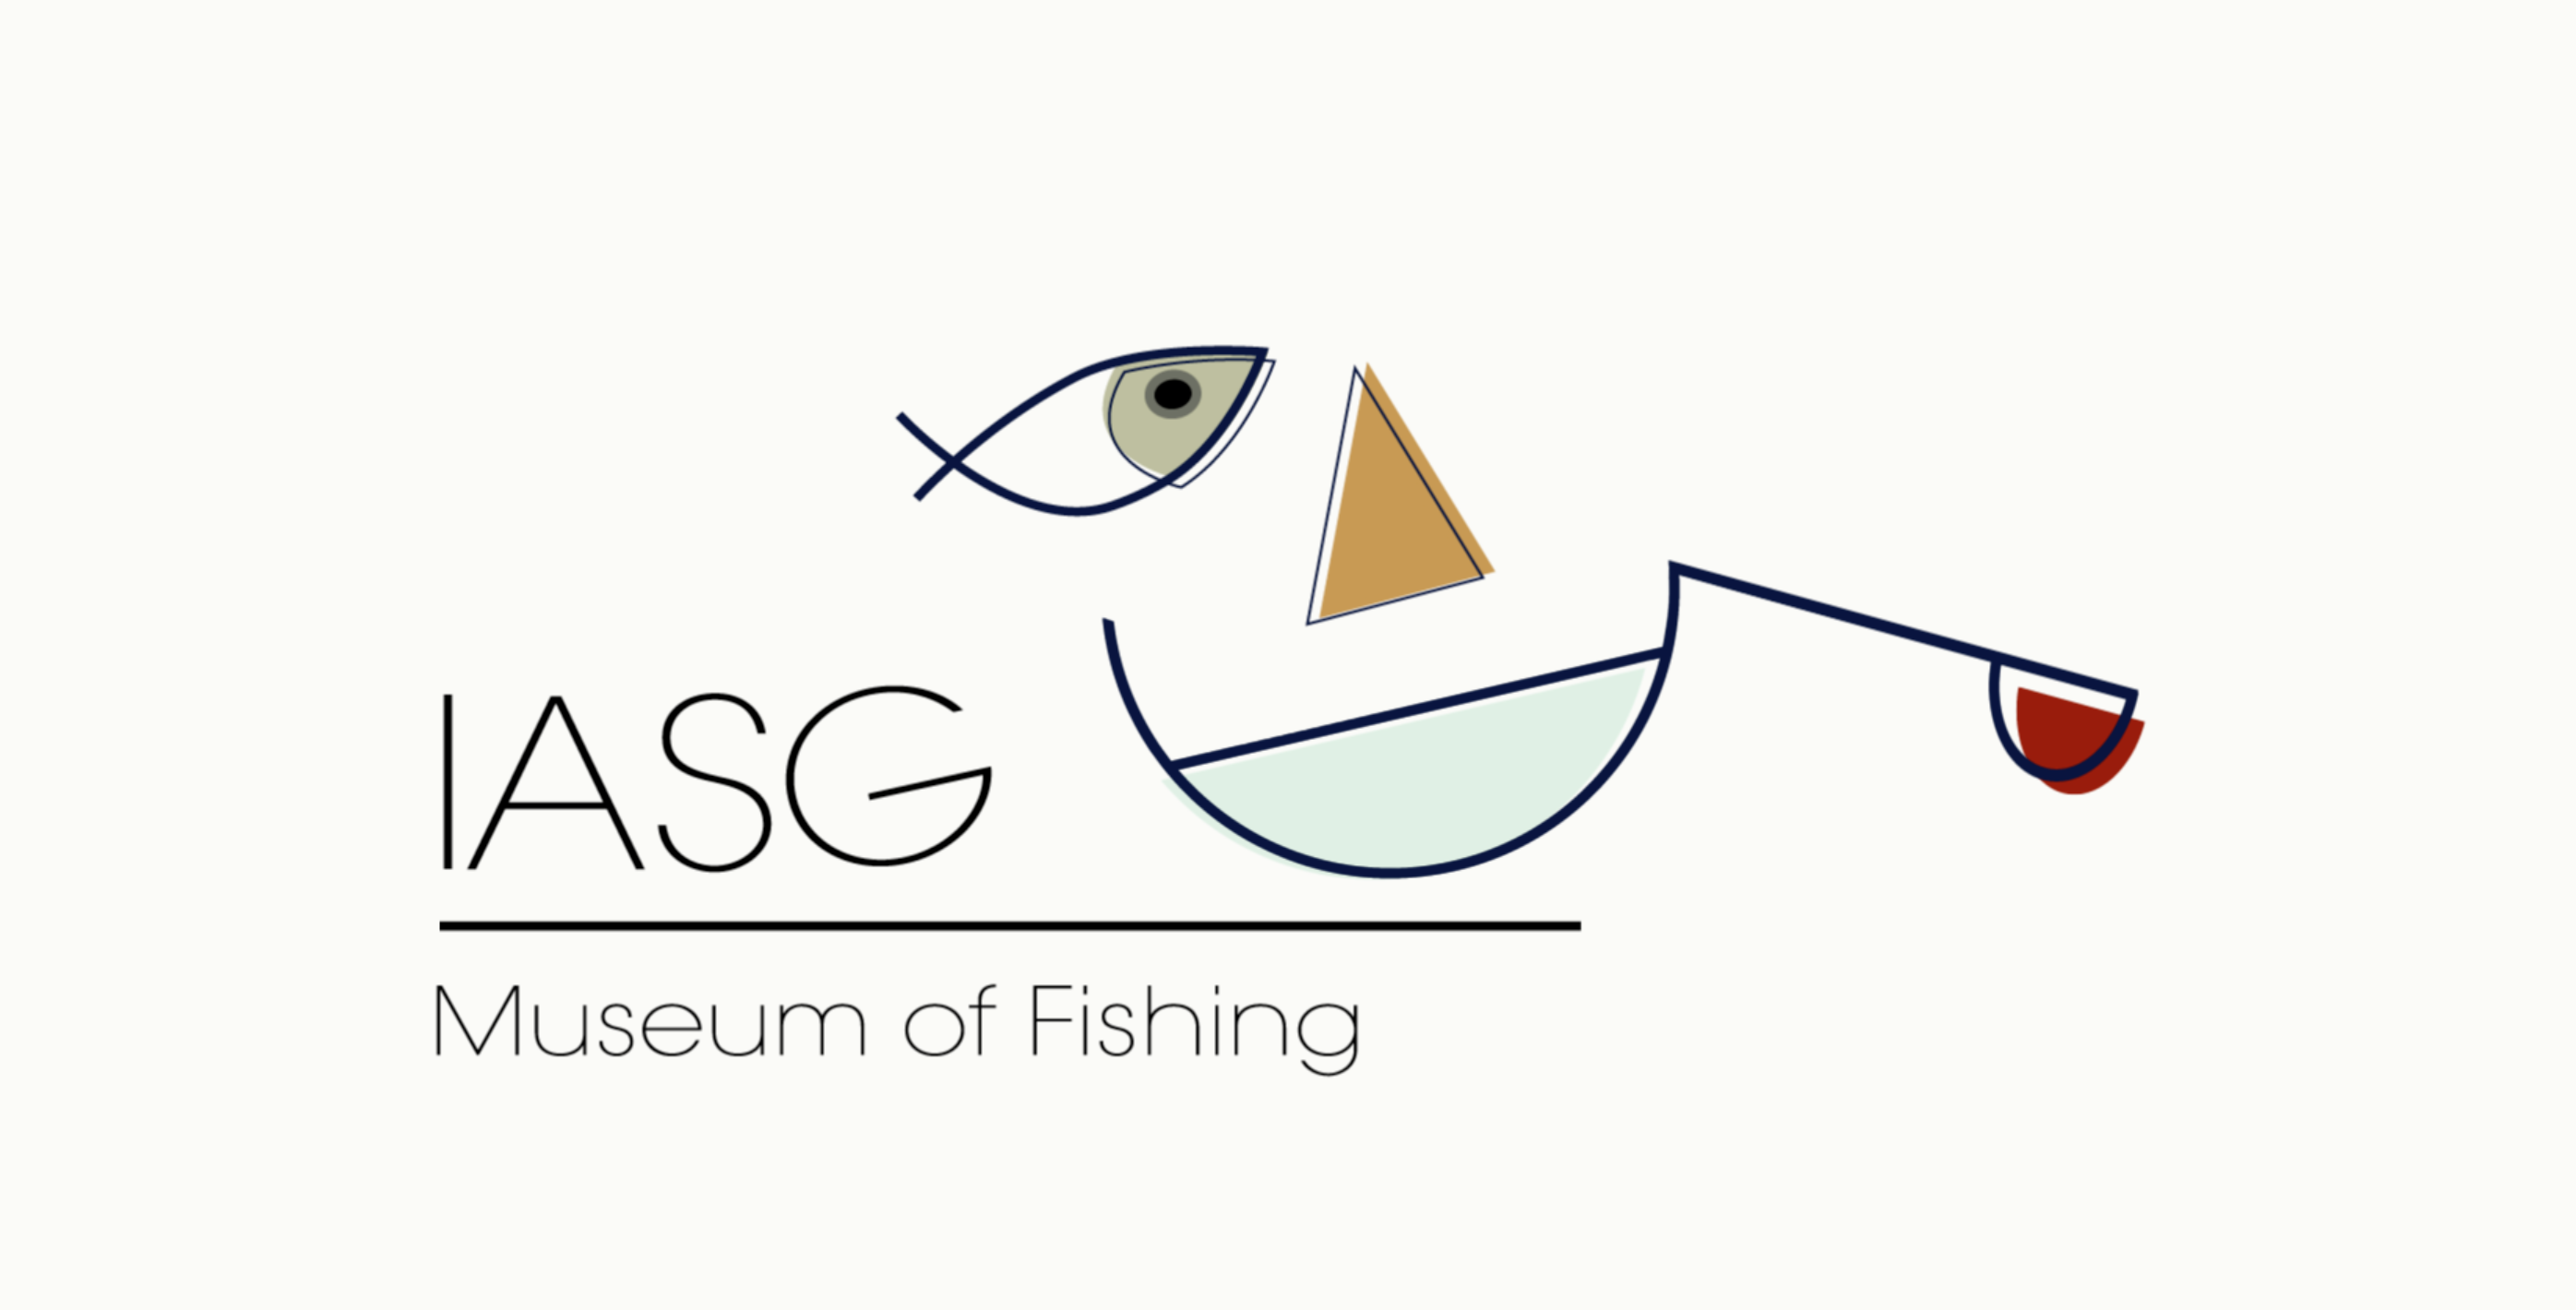 Click to view - IASG Logo animation